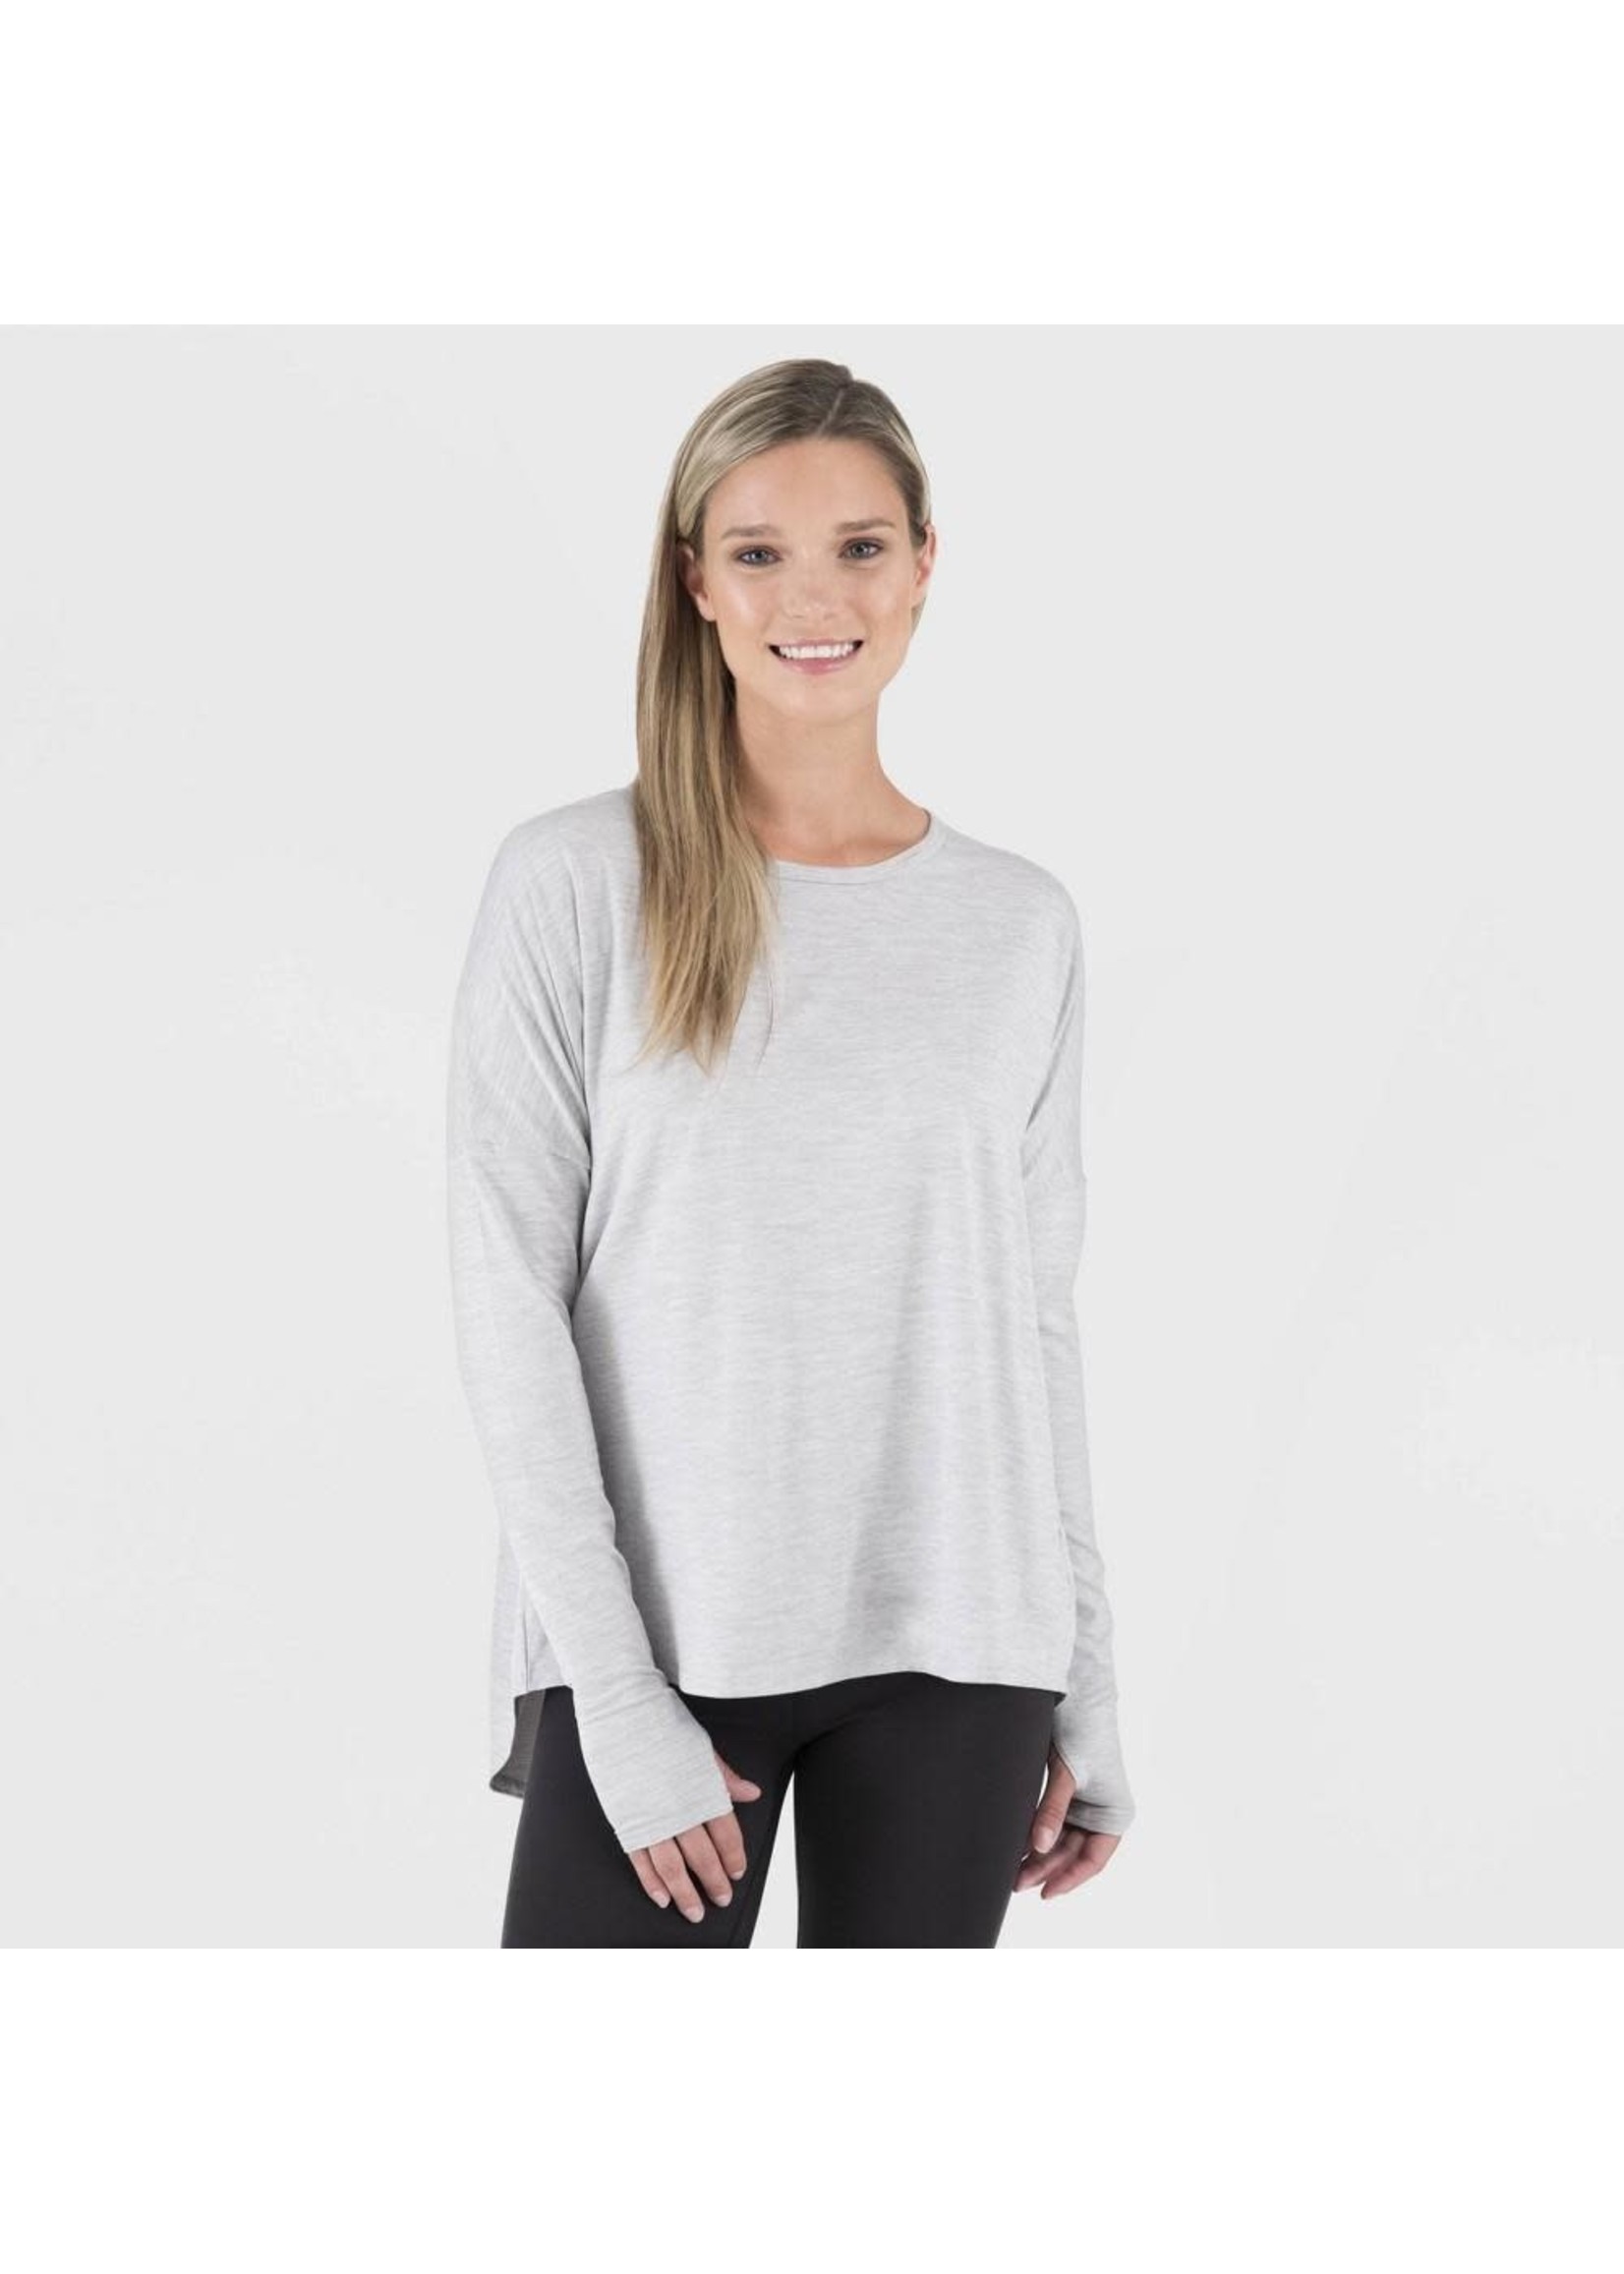 Wander by Hottotties Women's Charlotte Drop Shoulder Thermoregulation Tunic - Heather Gray L